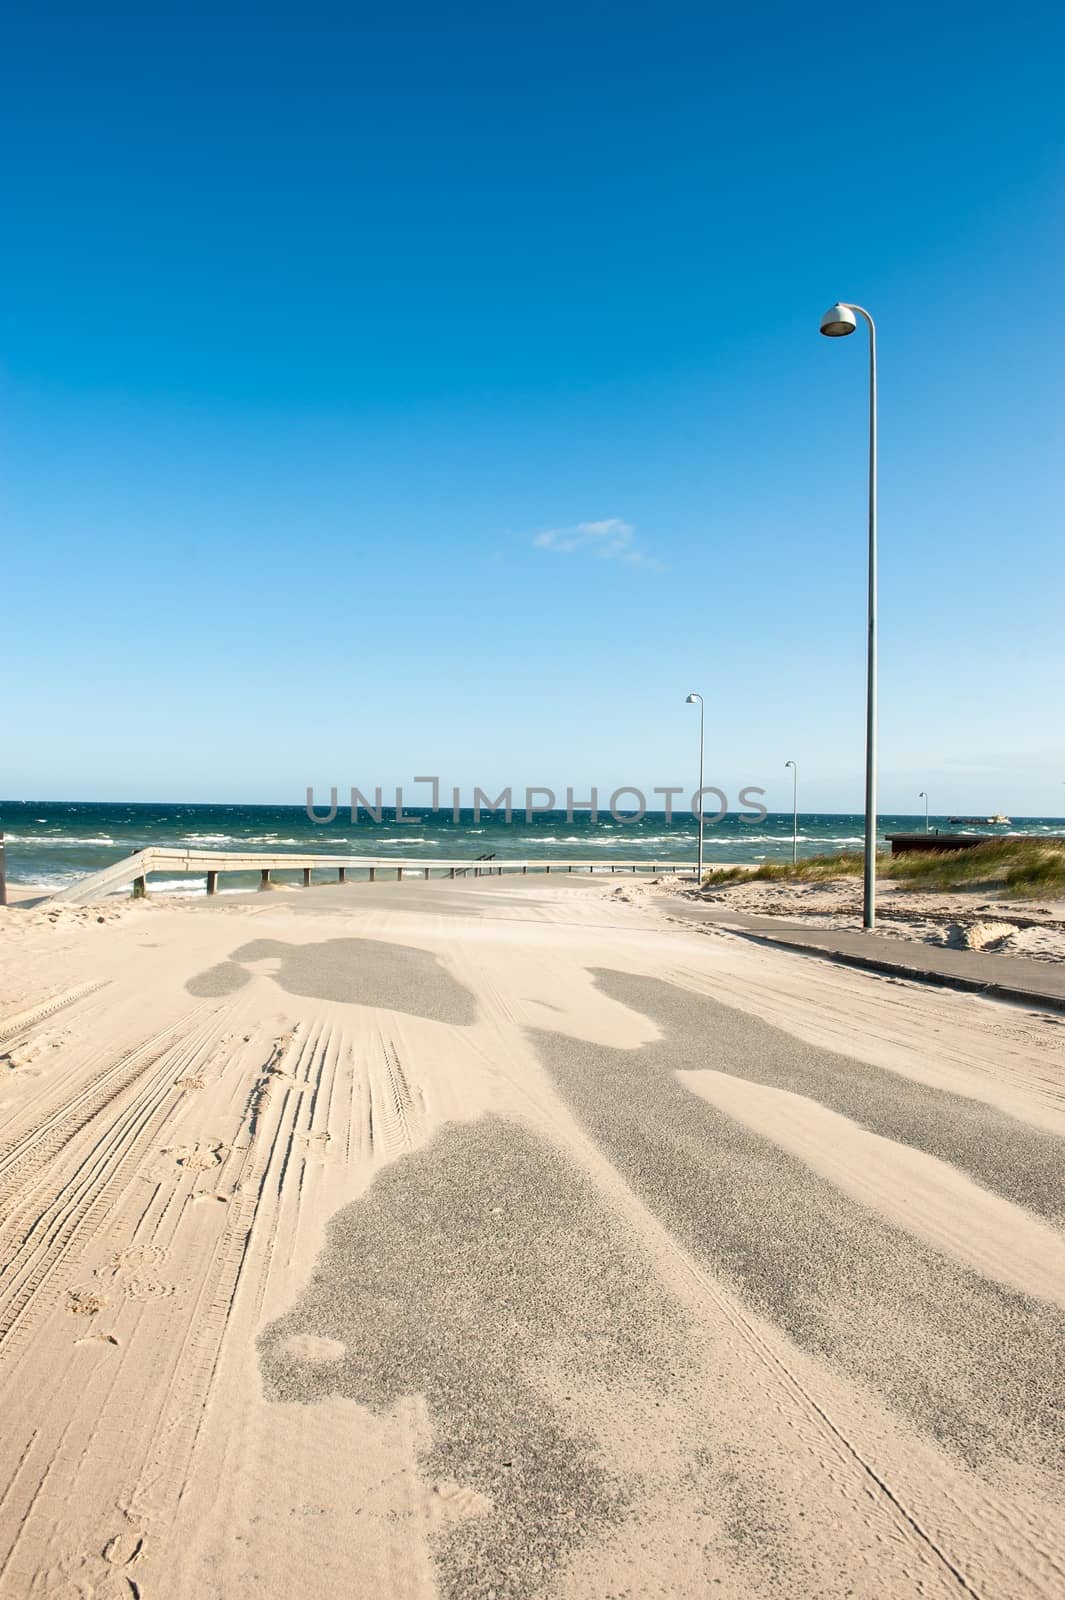 A road covered with sand in Hirtshals, Denmark